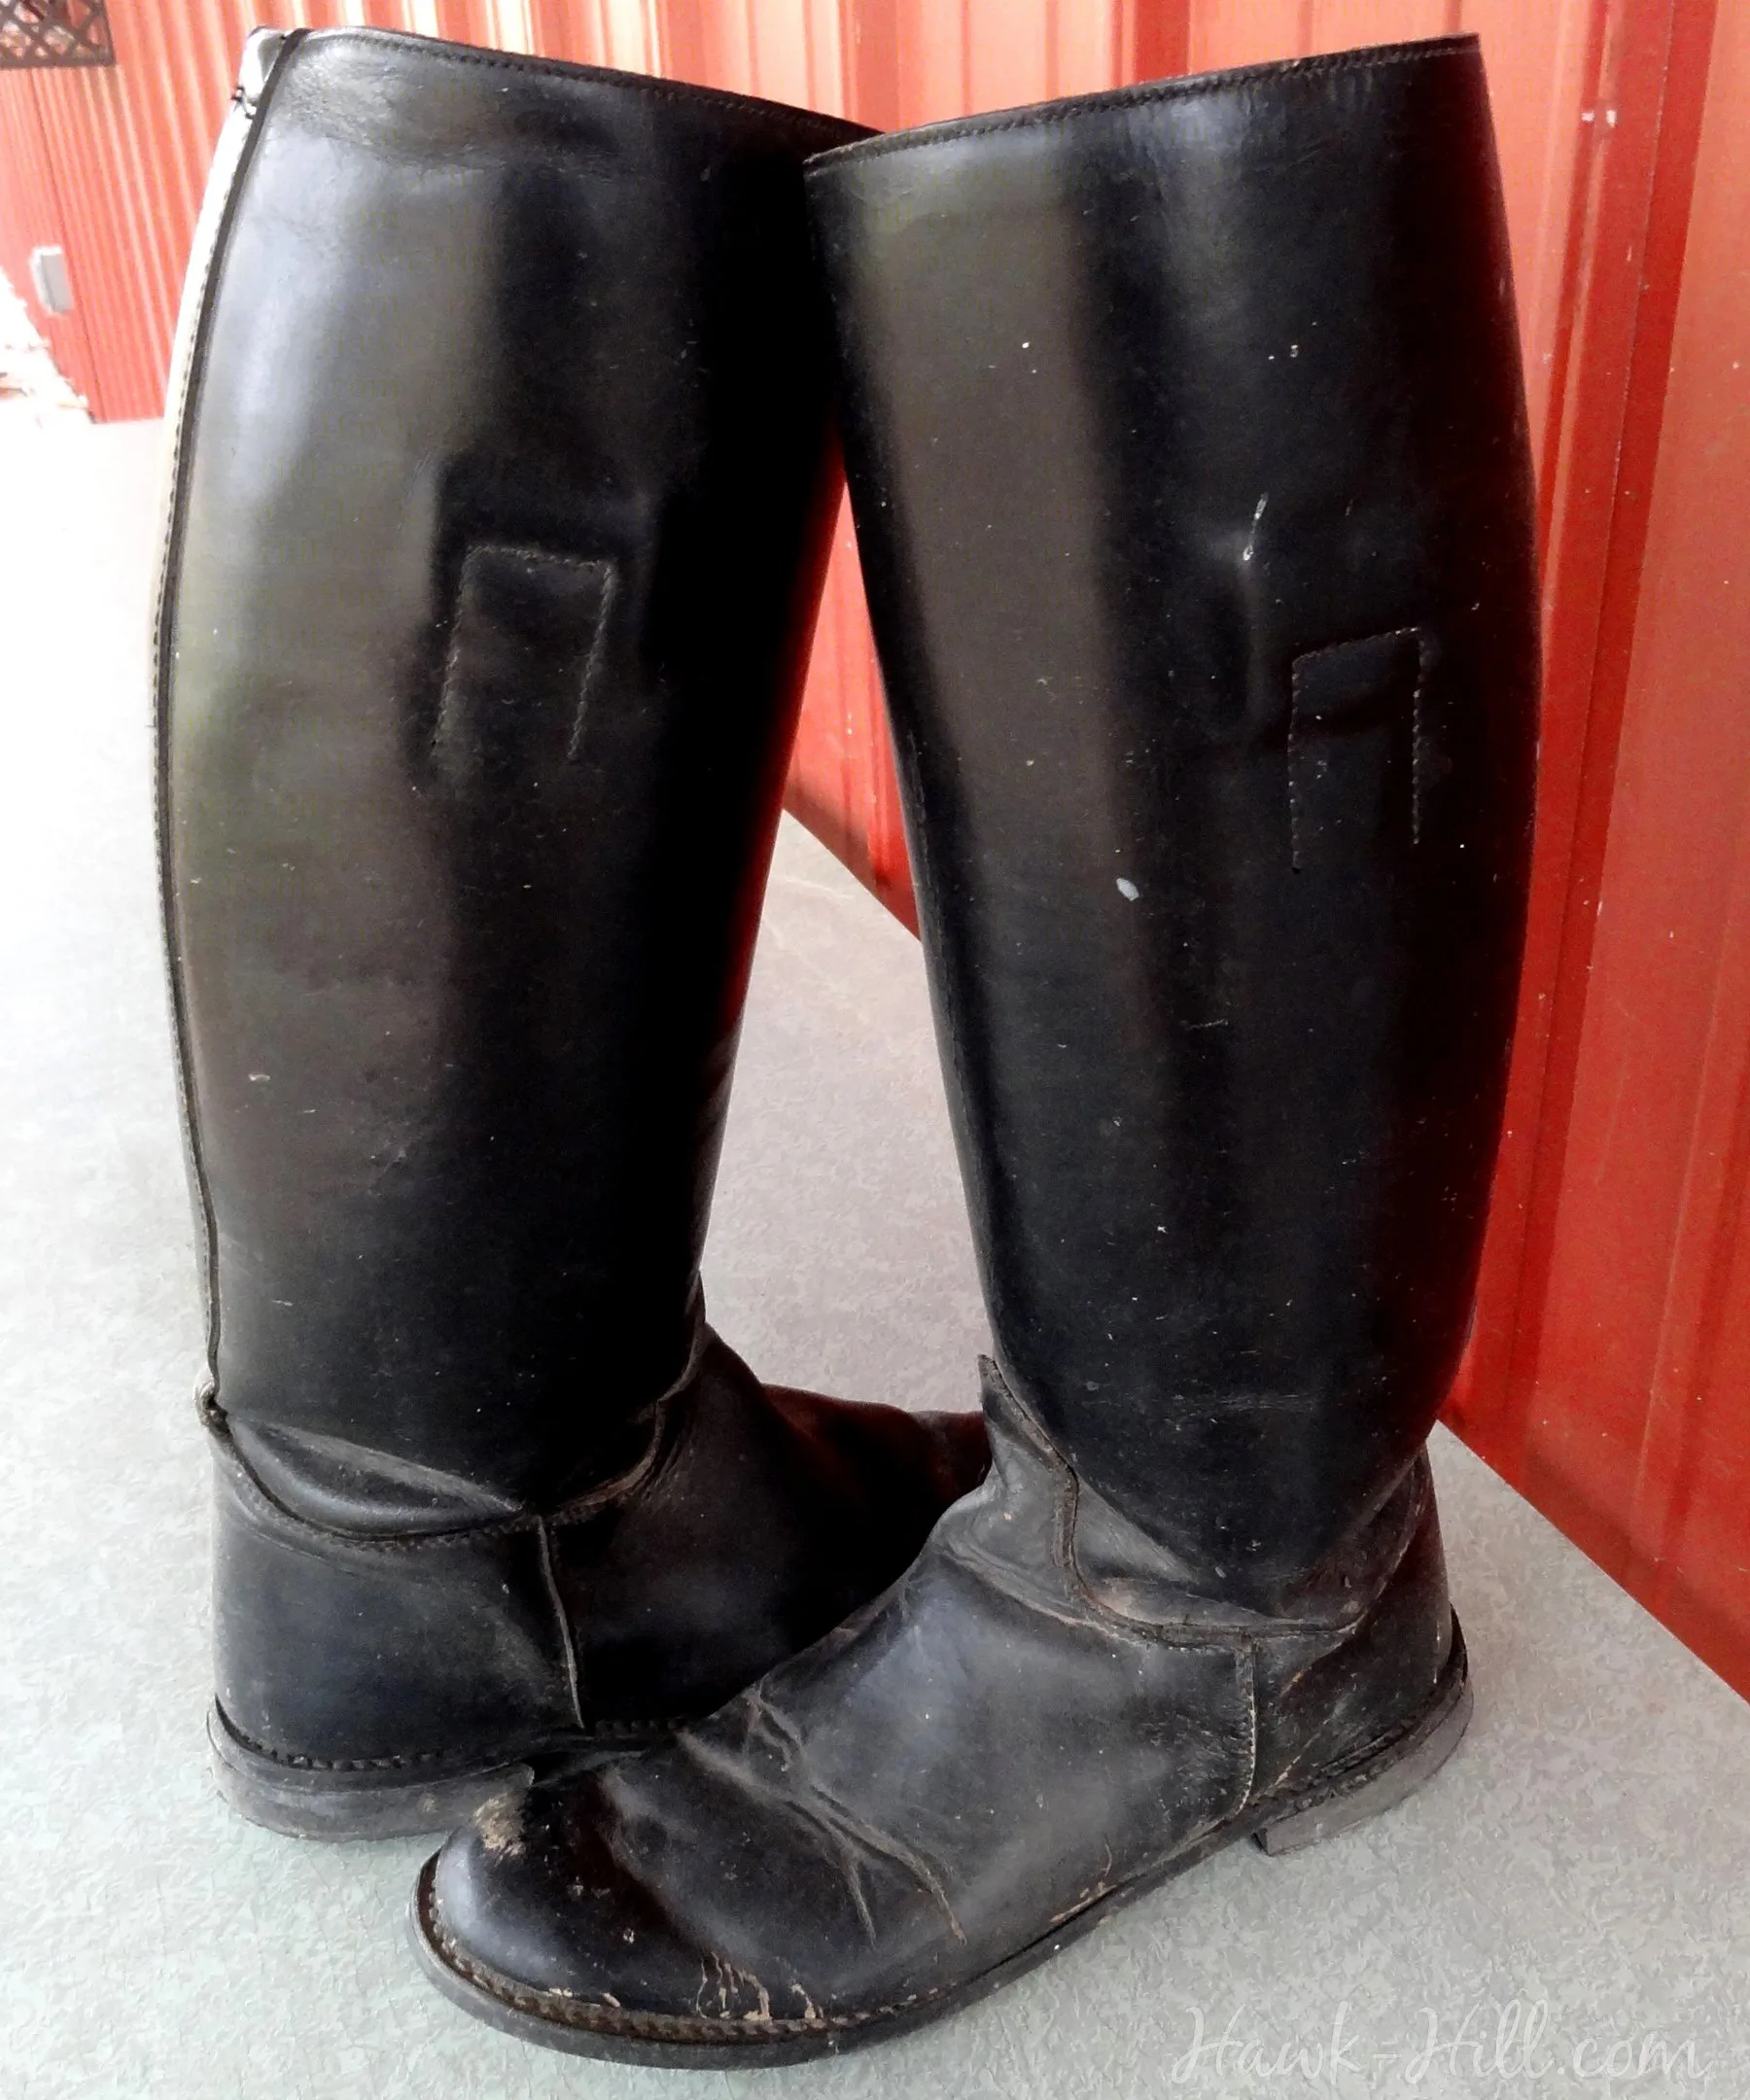 Refreshed and redyed leather boots